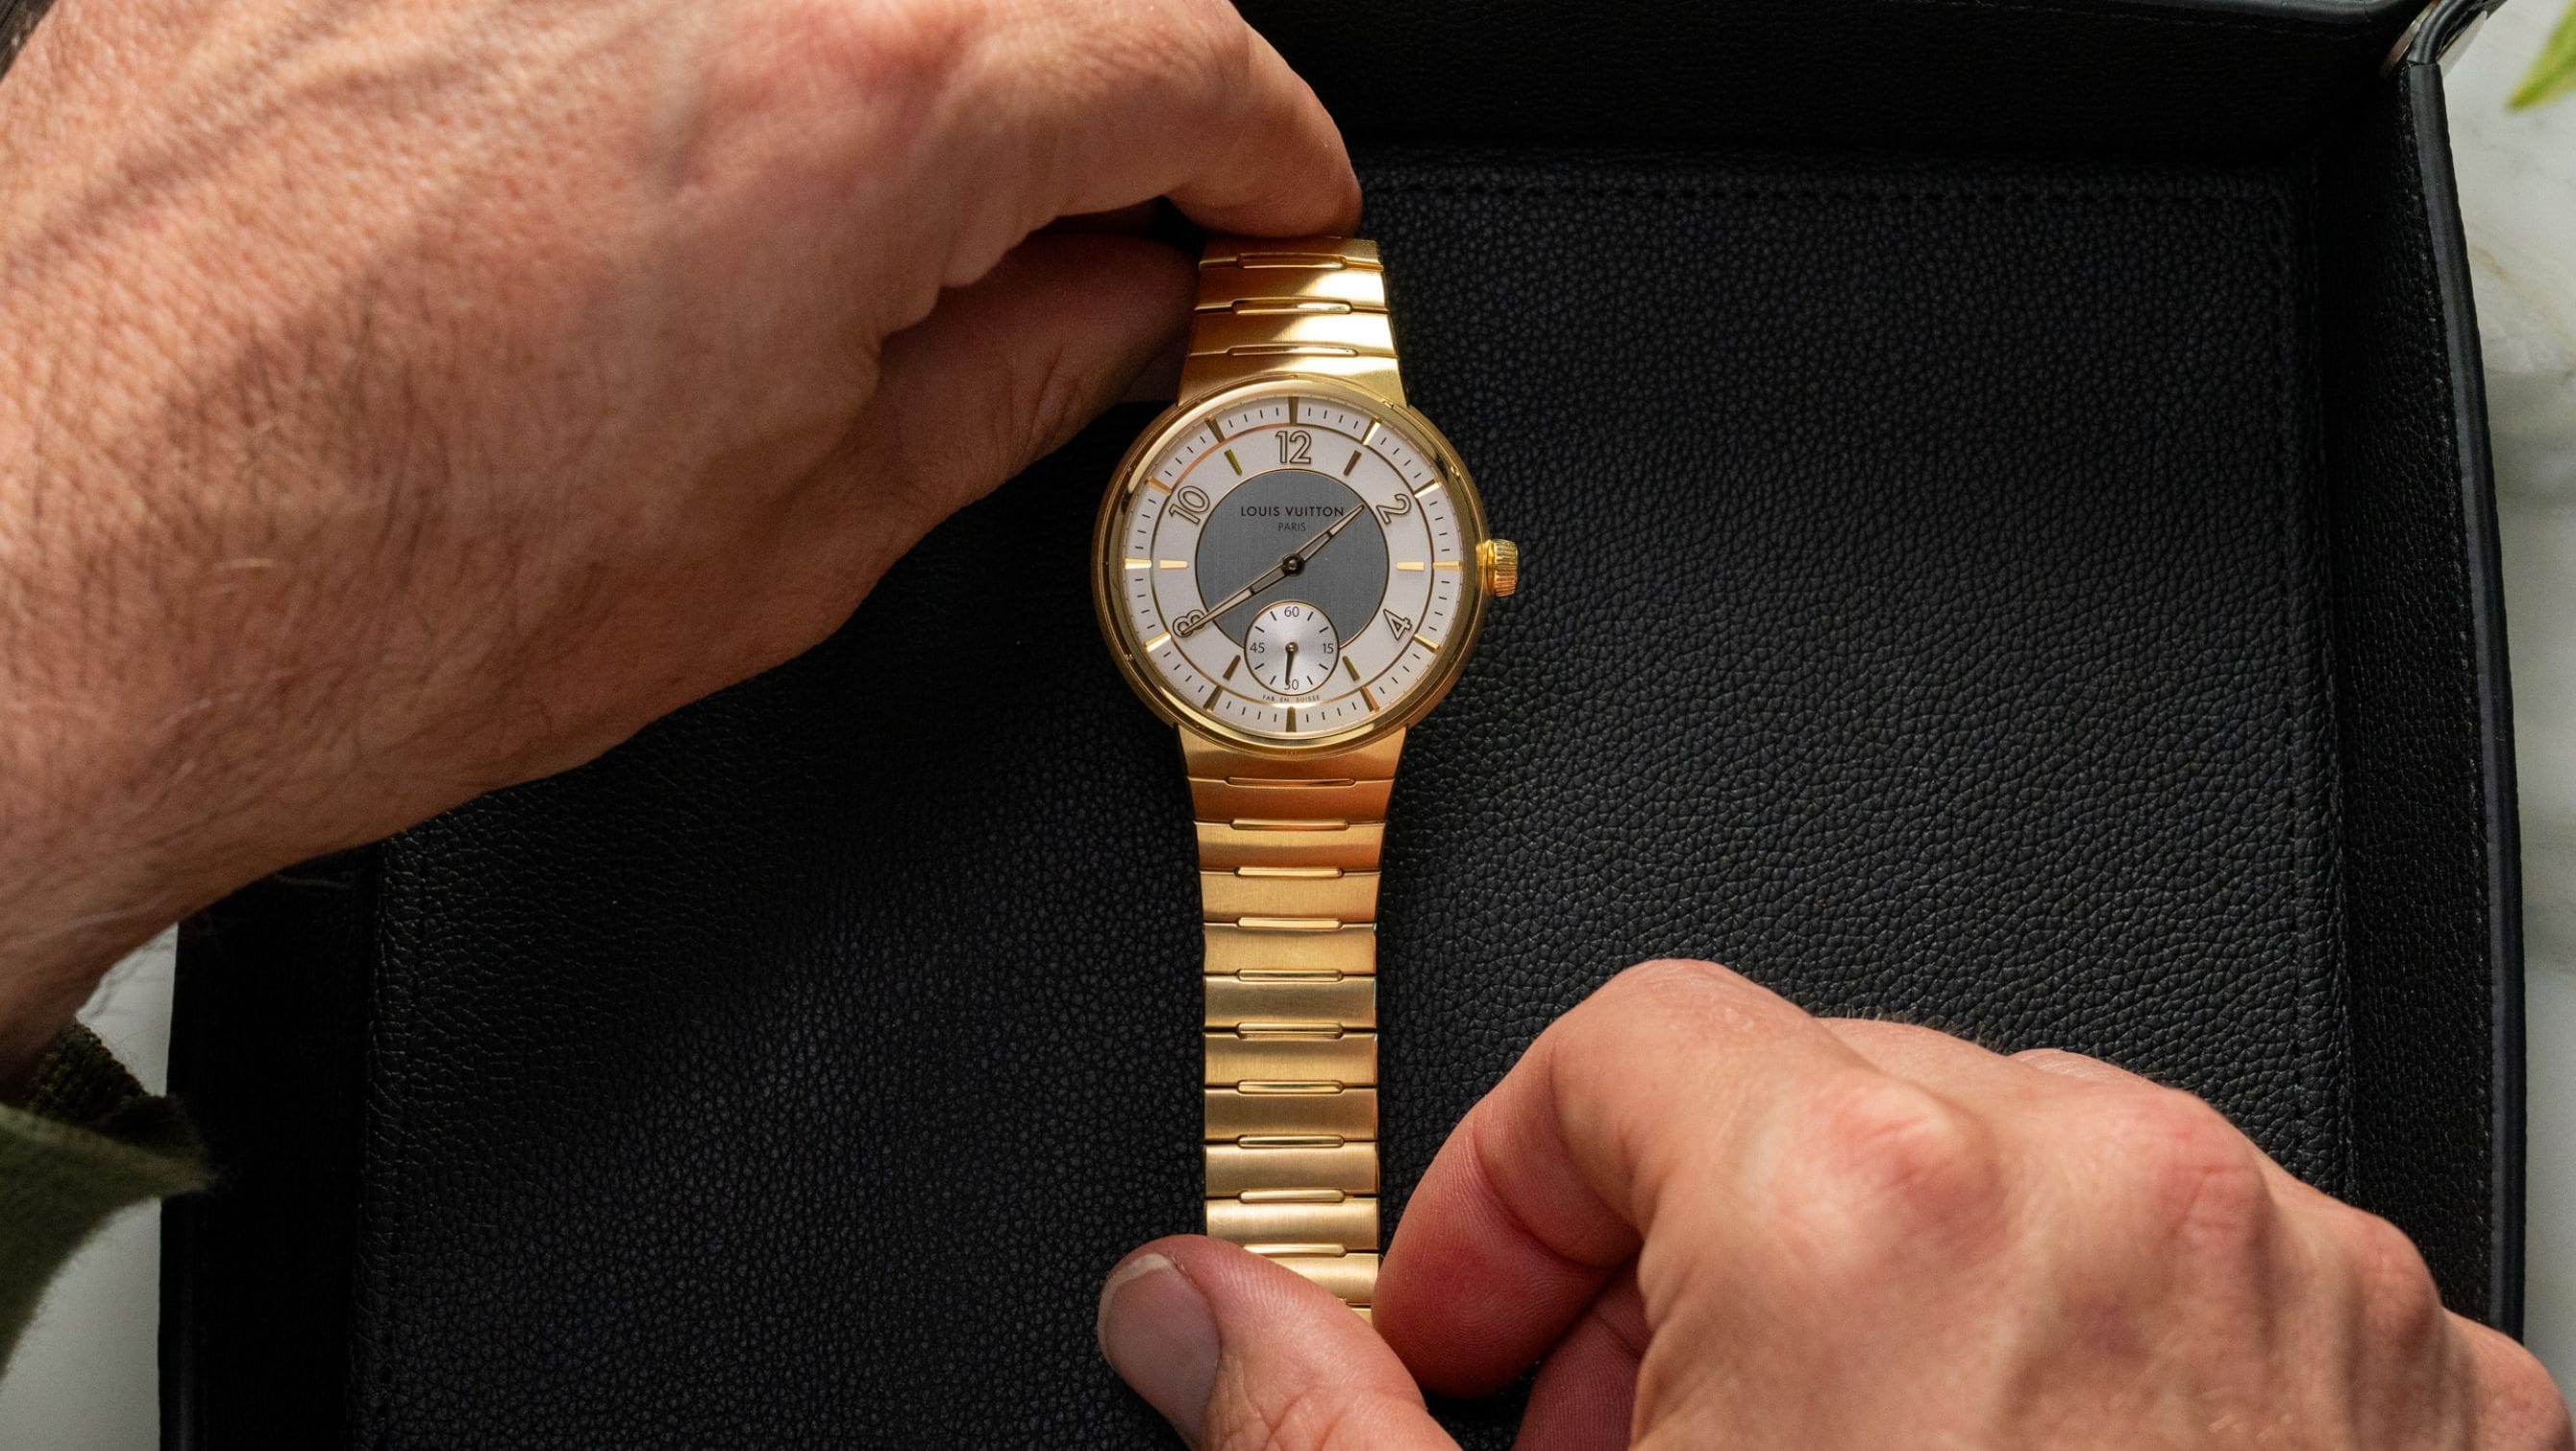 The new Louis Vuitton Tambour shines brightest in gold